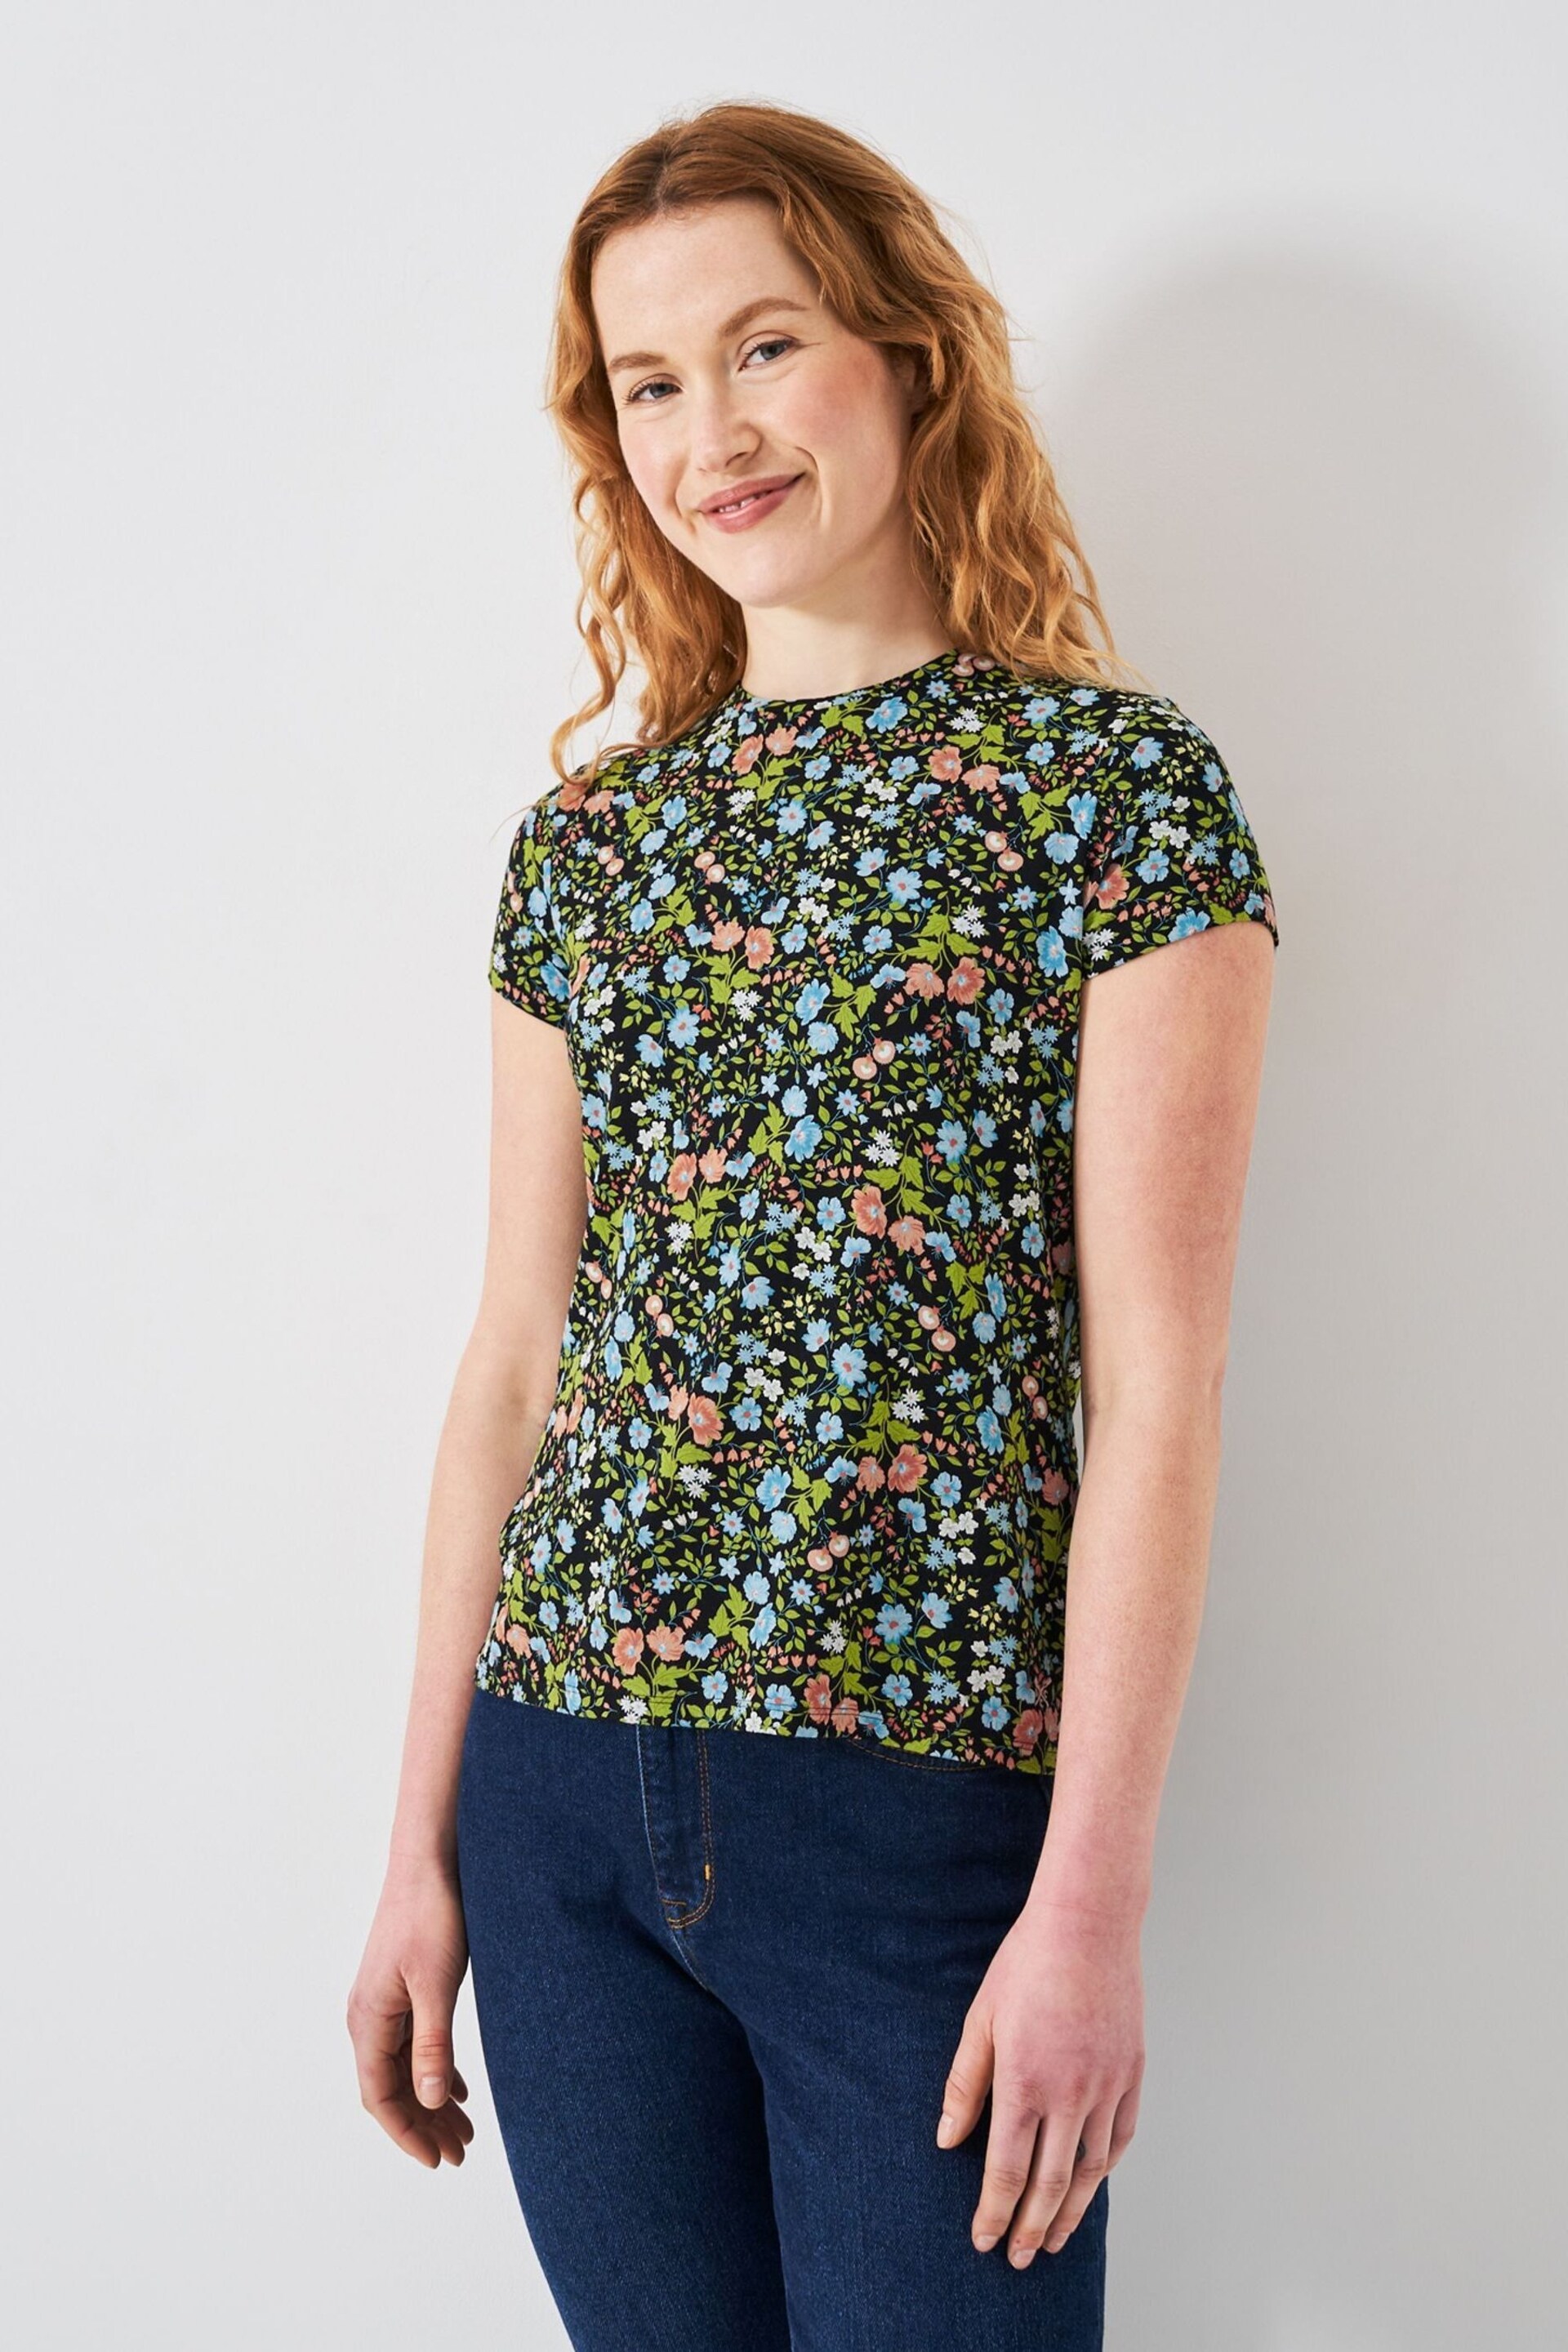 Crew Clothing Company Multi Floral Cotton Regular T-Shirt - Image 1 of 4